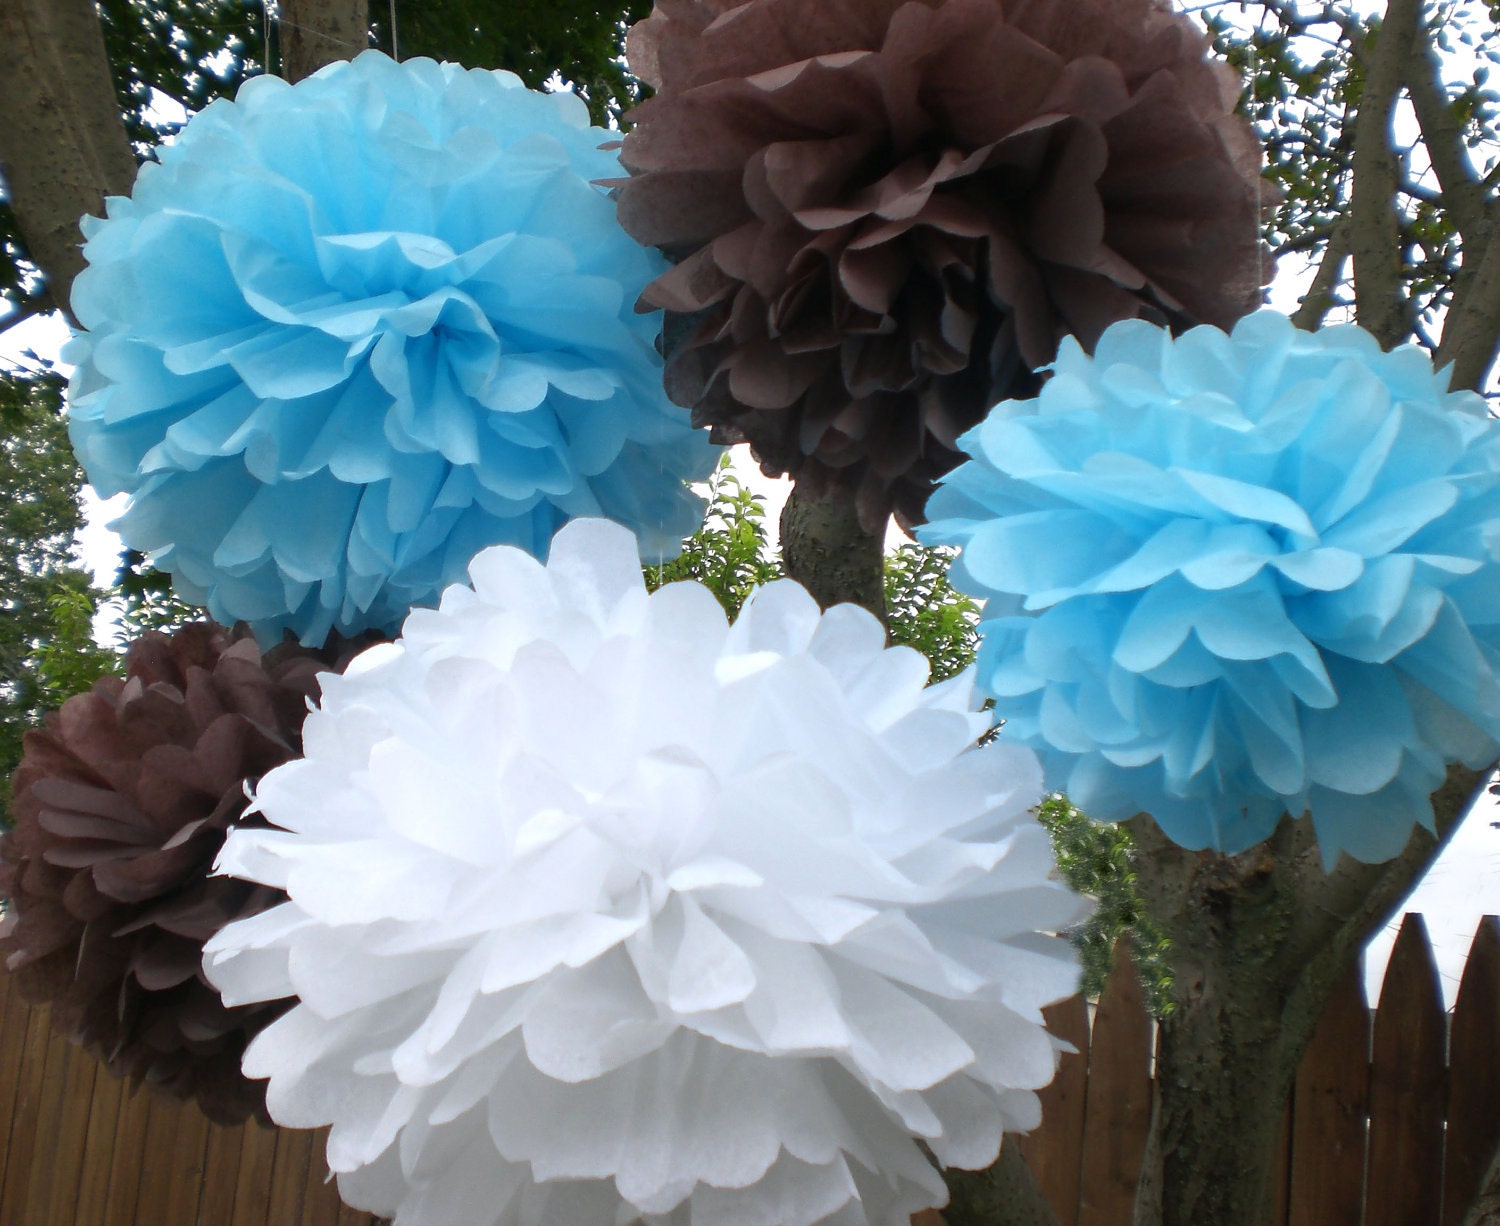 Popular items for baptism decor on Etsy